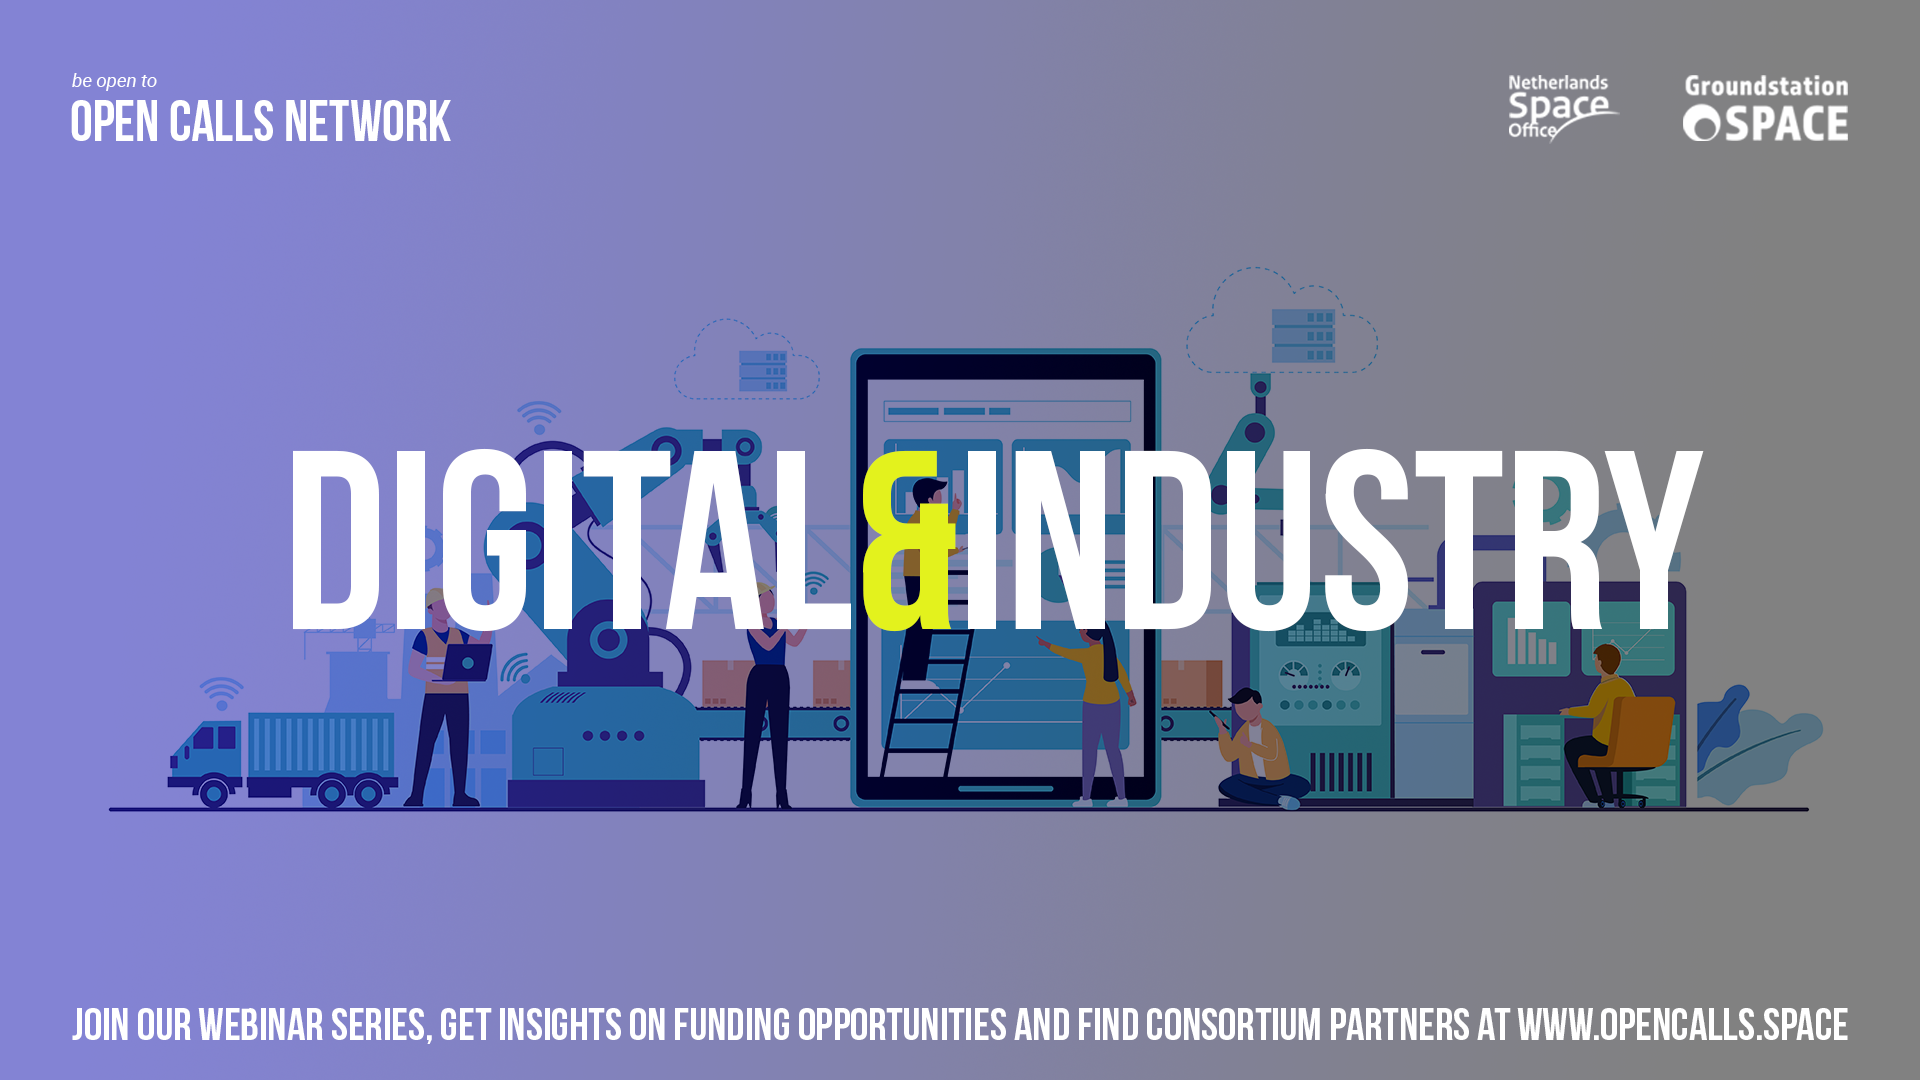 2. DIGITAL AND INDUSTRY